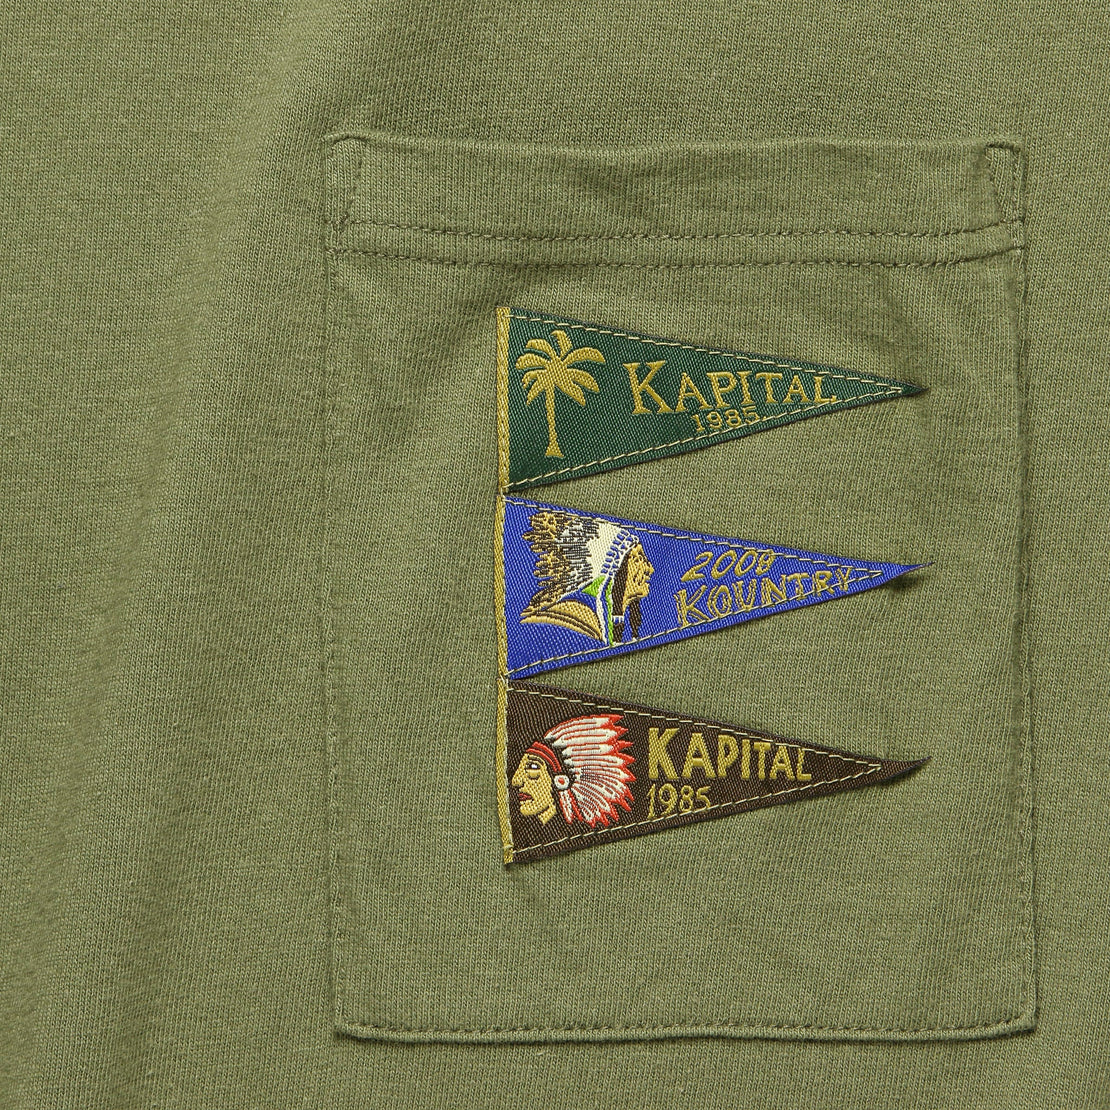 4 Pennant Flags Jersey Pocket Tee - Khaki - Kapital - STAG Provisions - Tops - S/S Tee